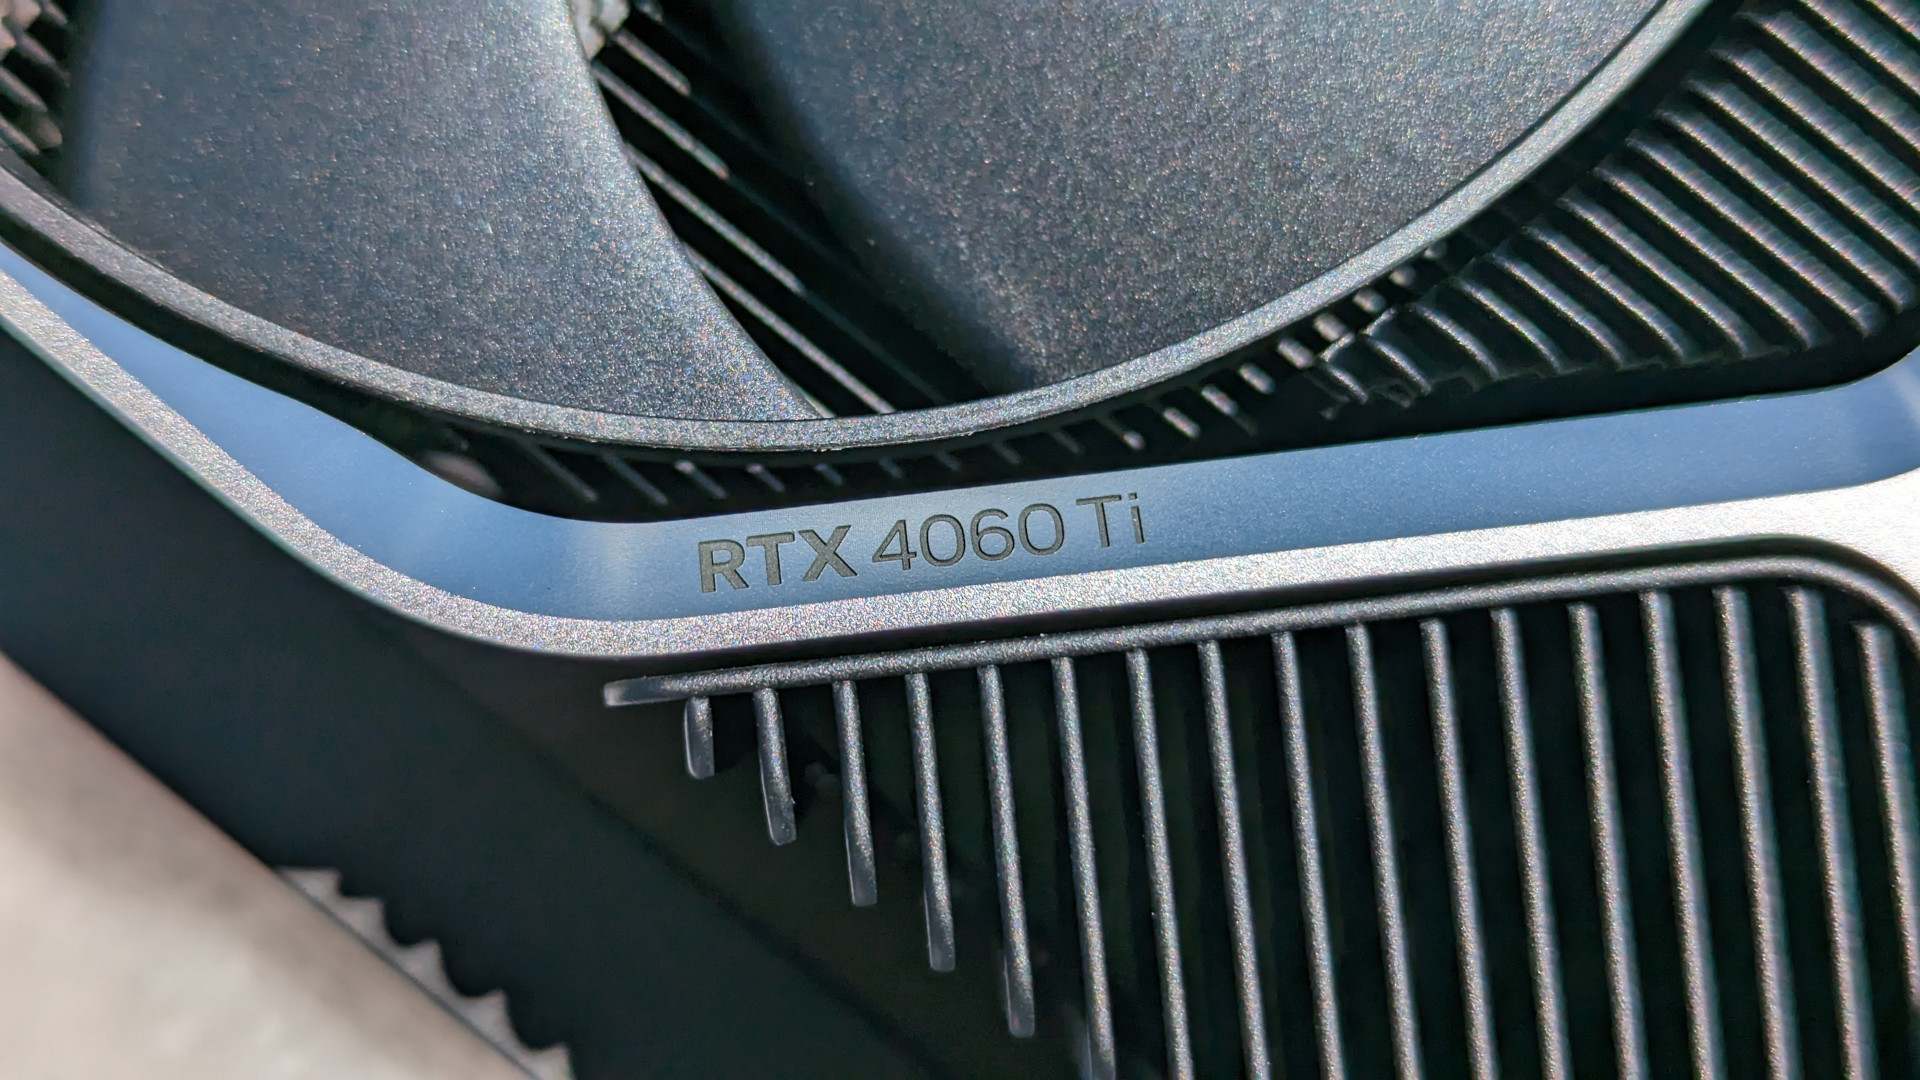 Nvidia GeForce RTX 4060 Ti 8GB review: A top down view of the graphics card, zooming in on its "RTX 4060 Ti" logo